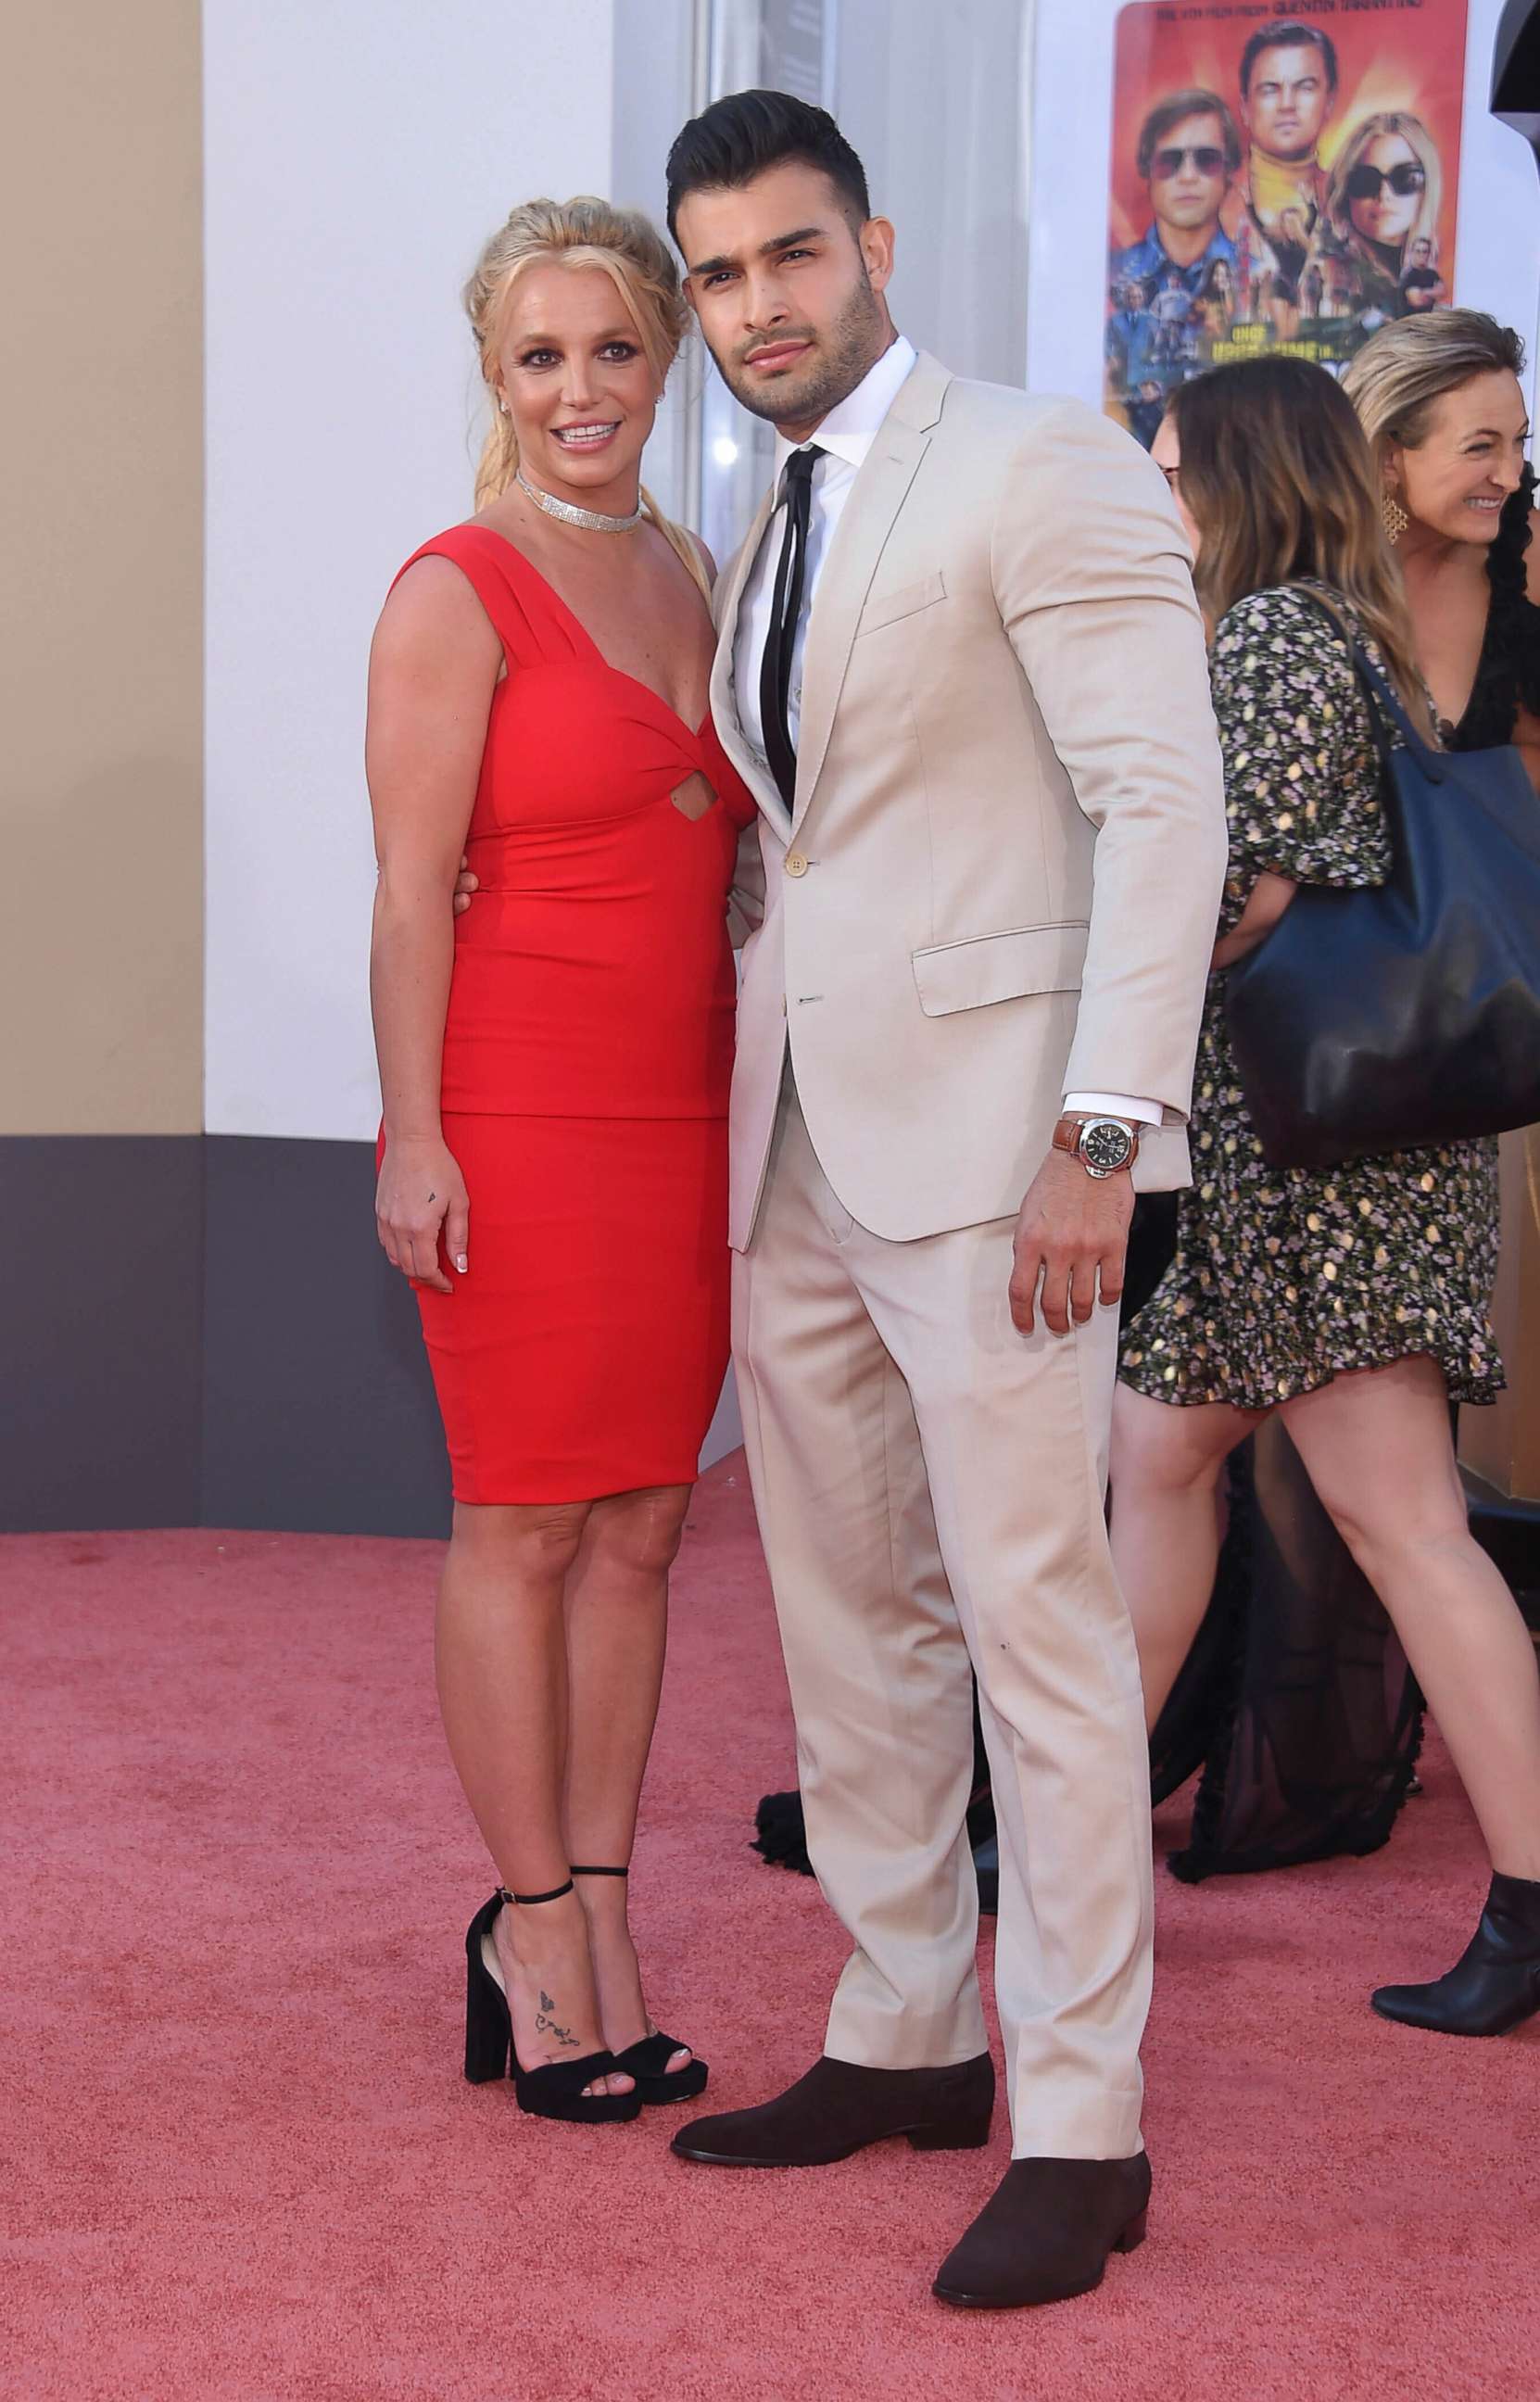 PHOTO: Britney Spears and Sam Asghari attend the premiere of "Once Upon A Time In Hollywood" in Los Angeles, July 22, 2019.